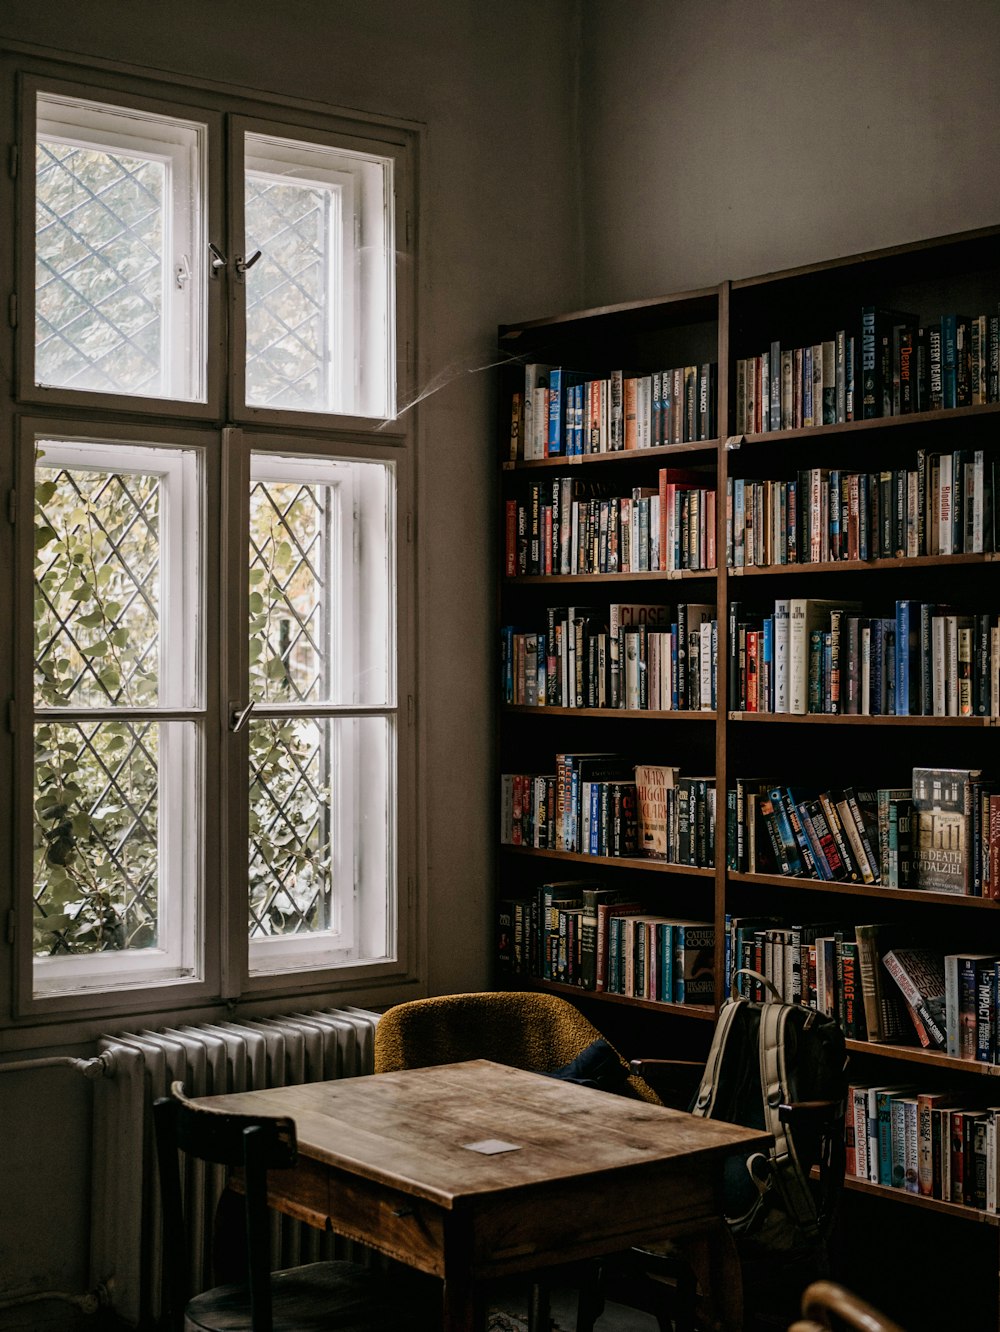 a wooden table sitting in front of a window filled with books